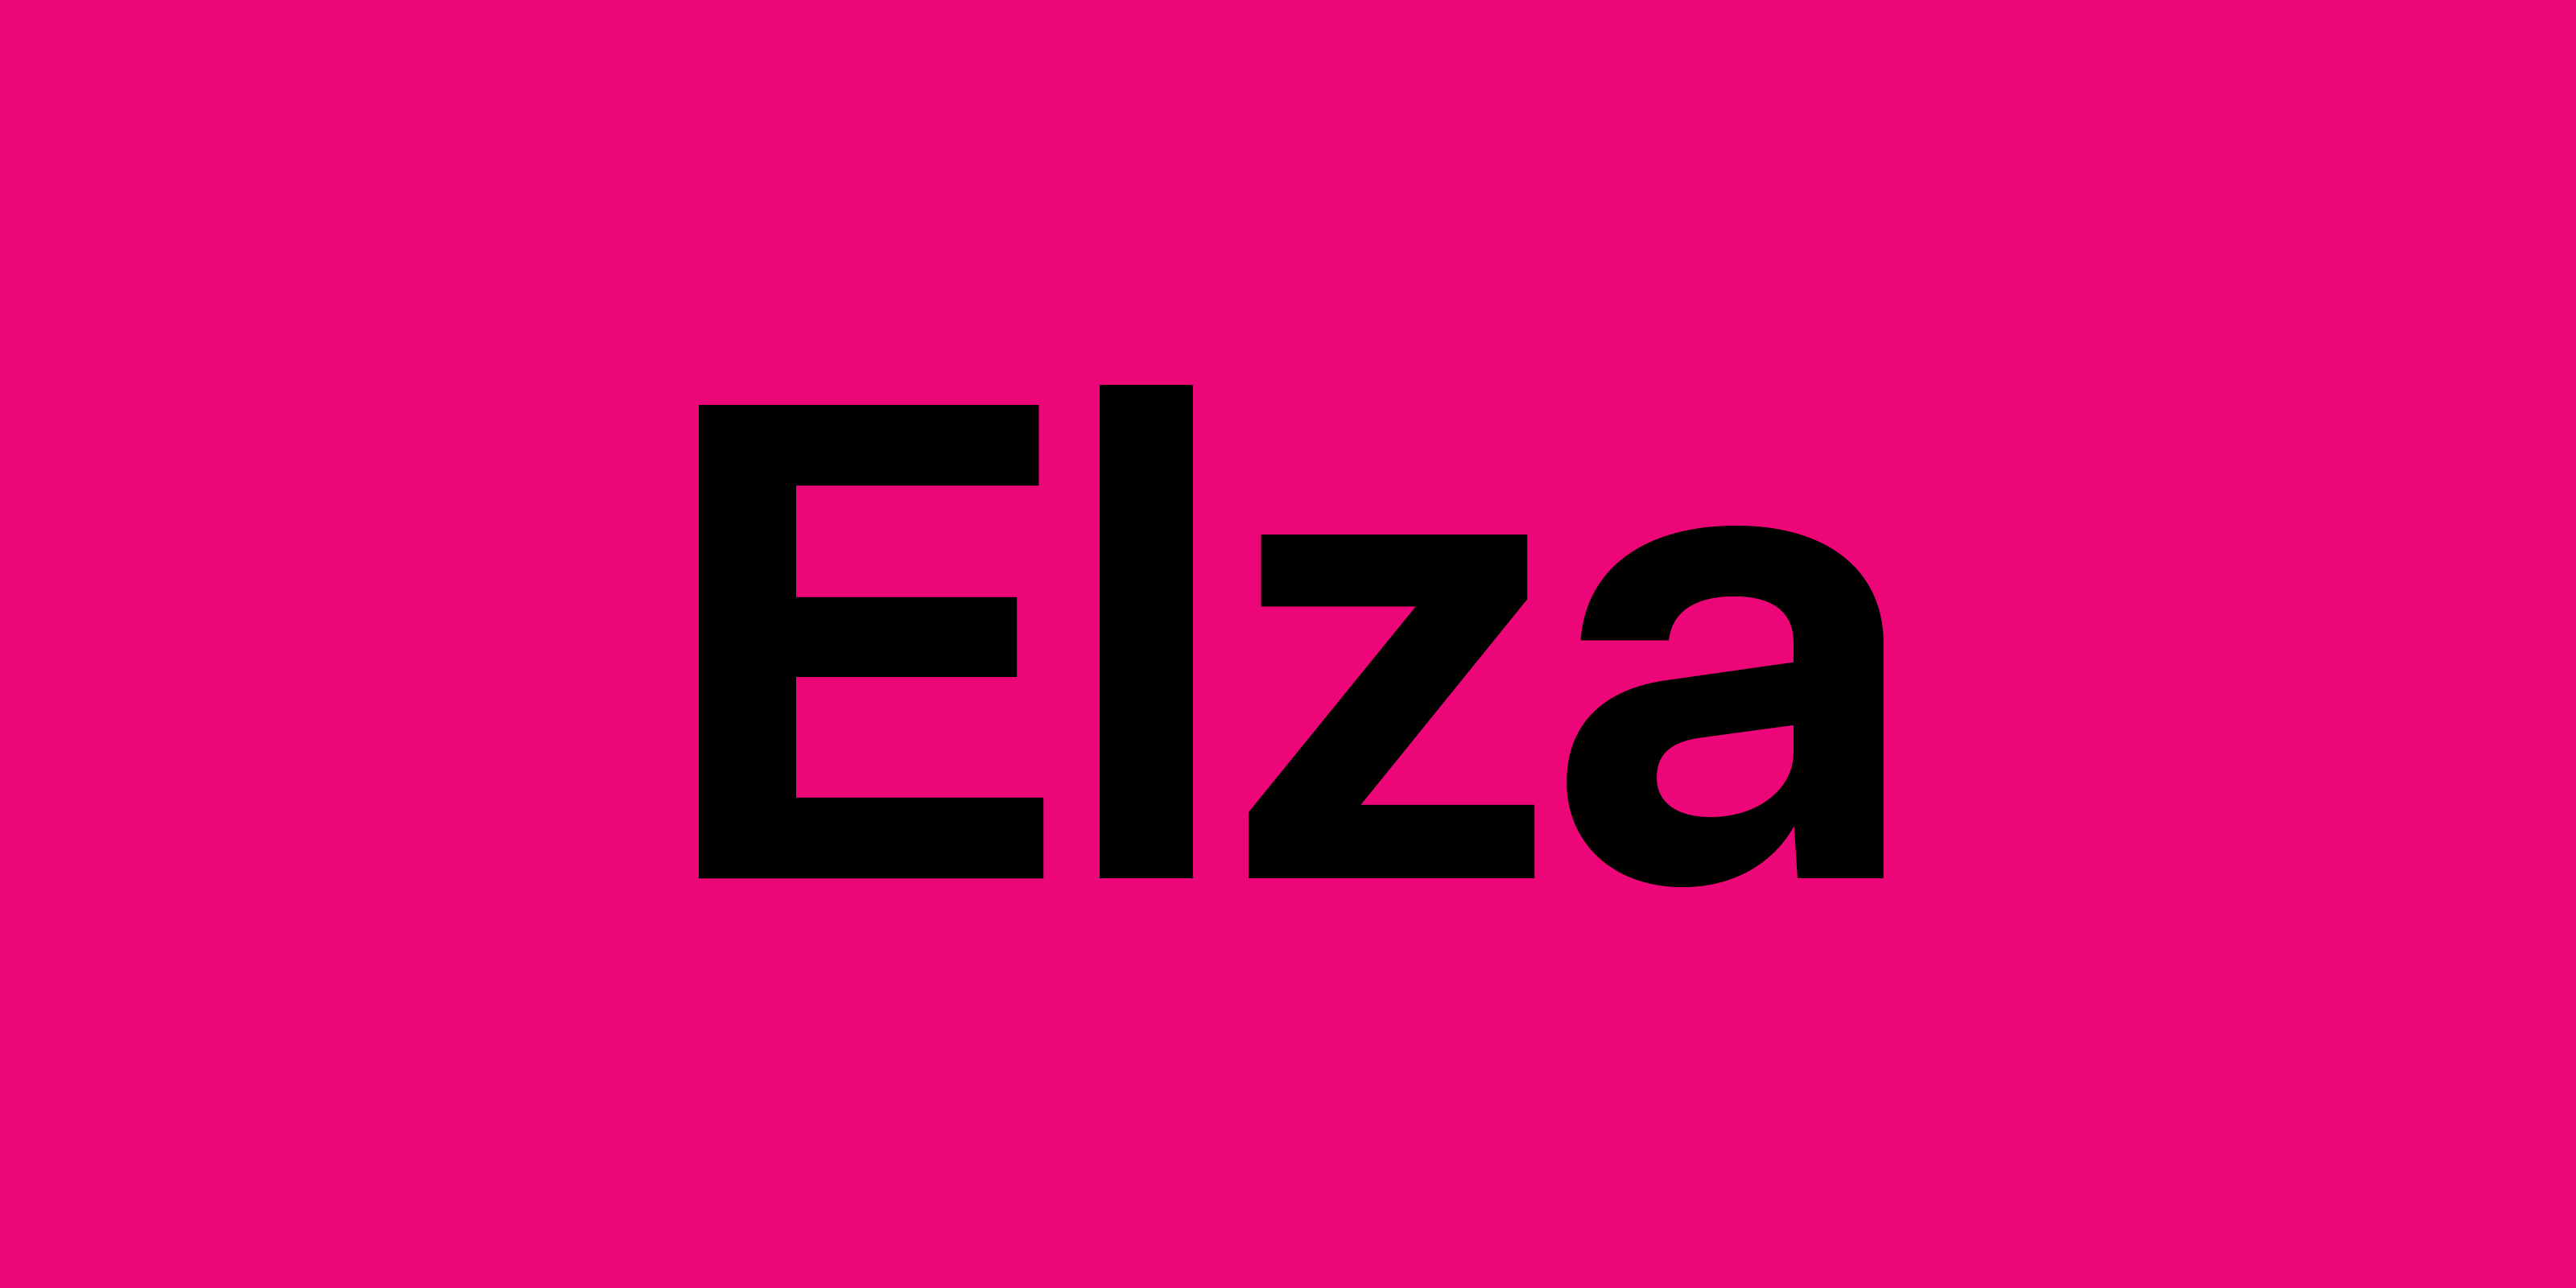 Card displaying Elza typeface in various styles